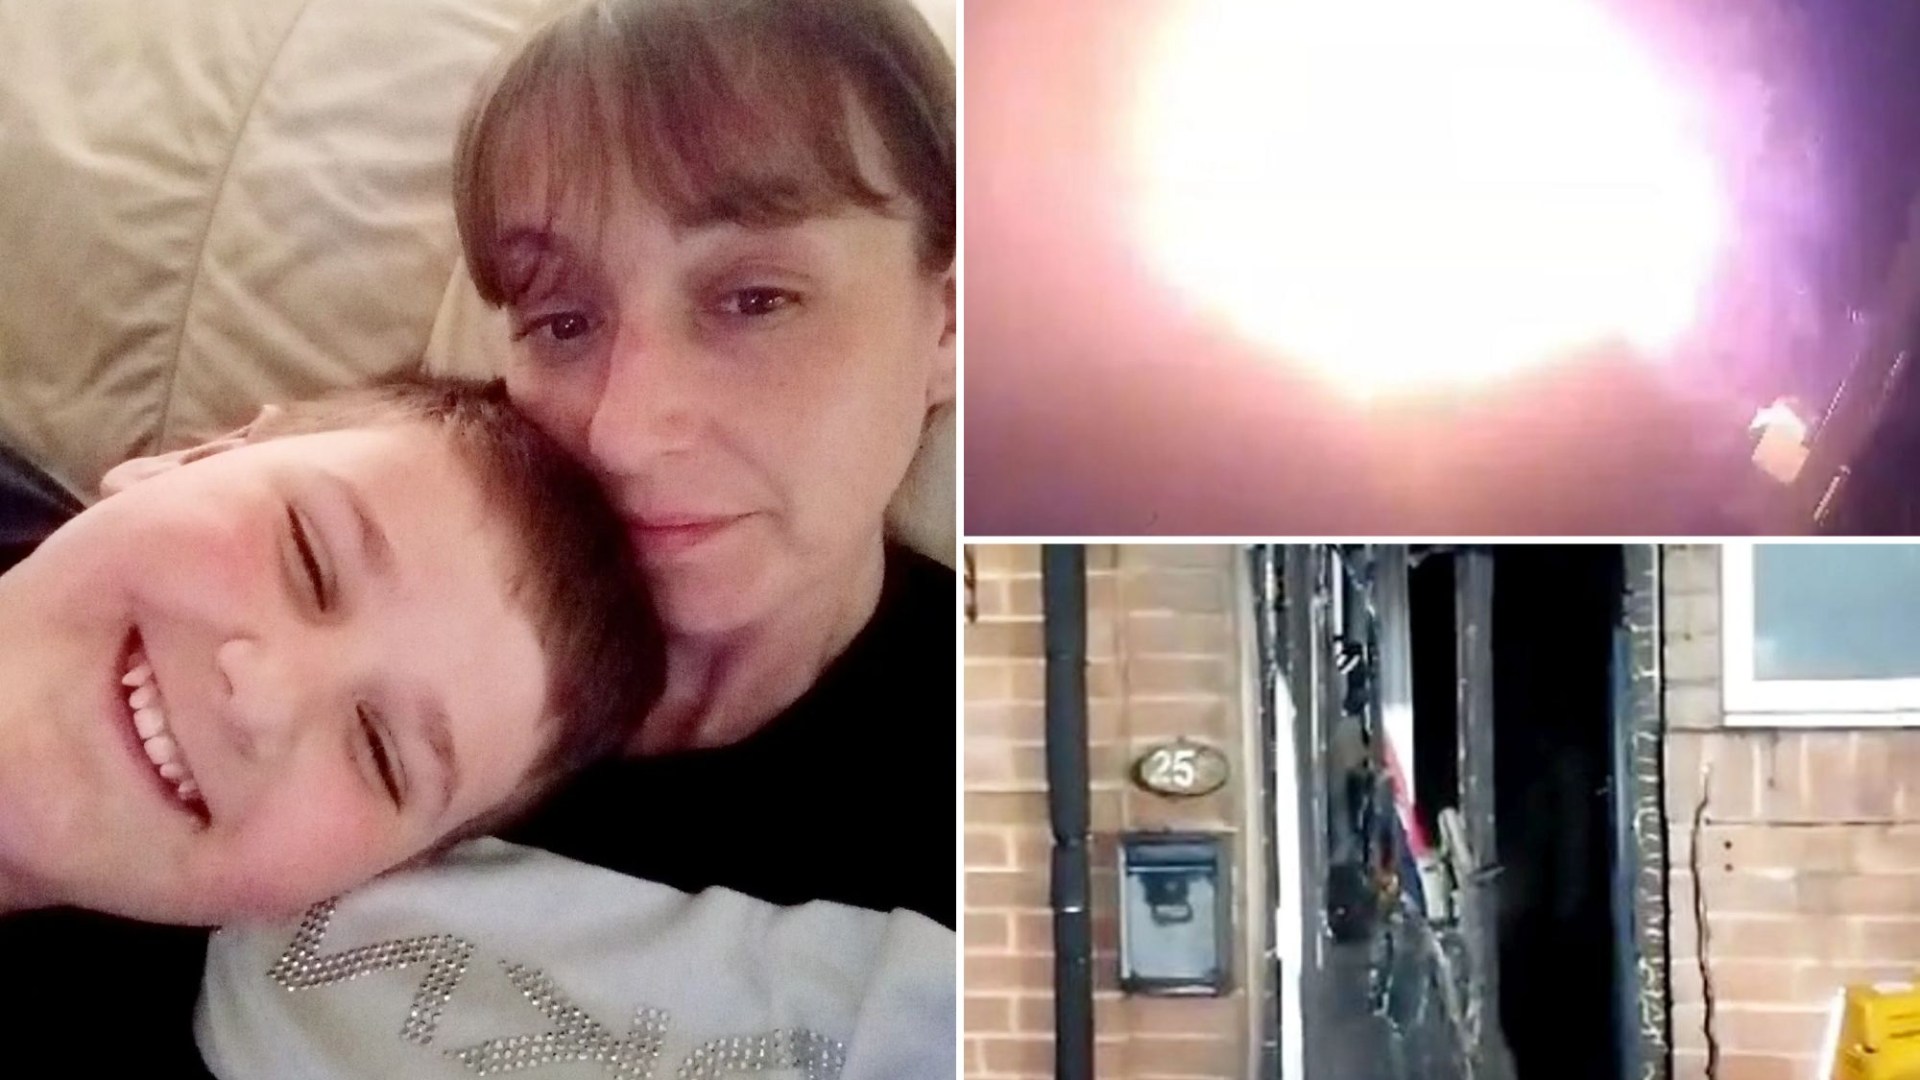 Shocking: Home Petrol Bombed as Mother and Son Slept – Cops Cite Lack of Evidence